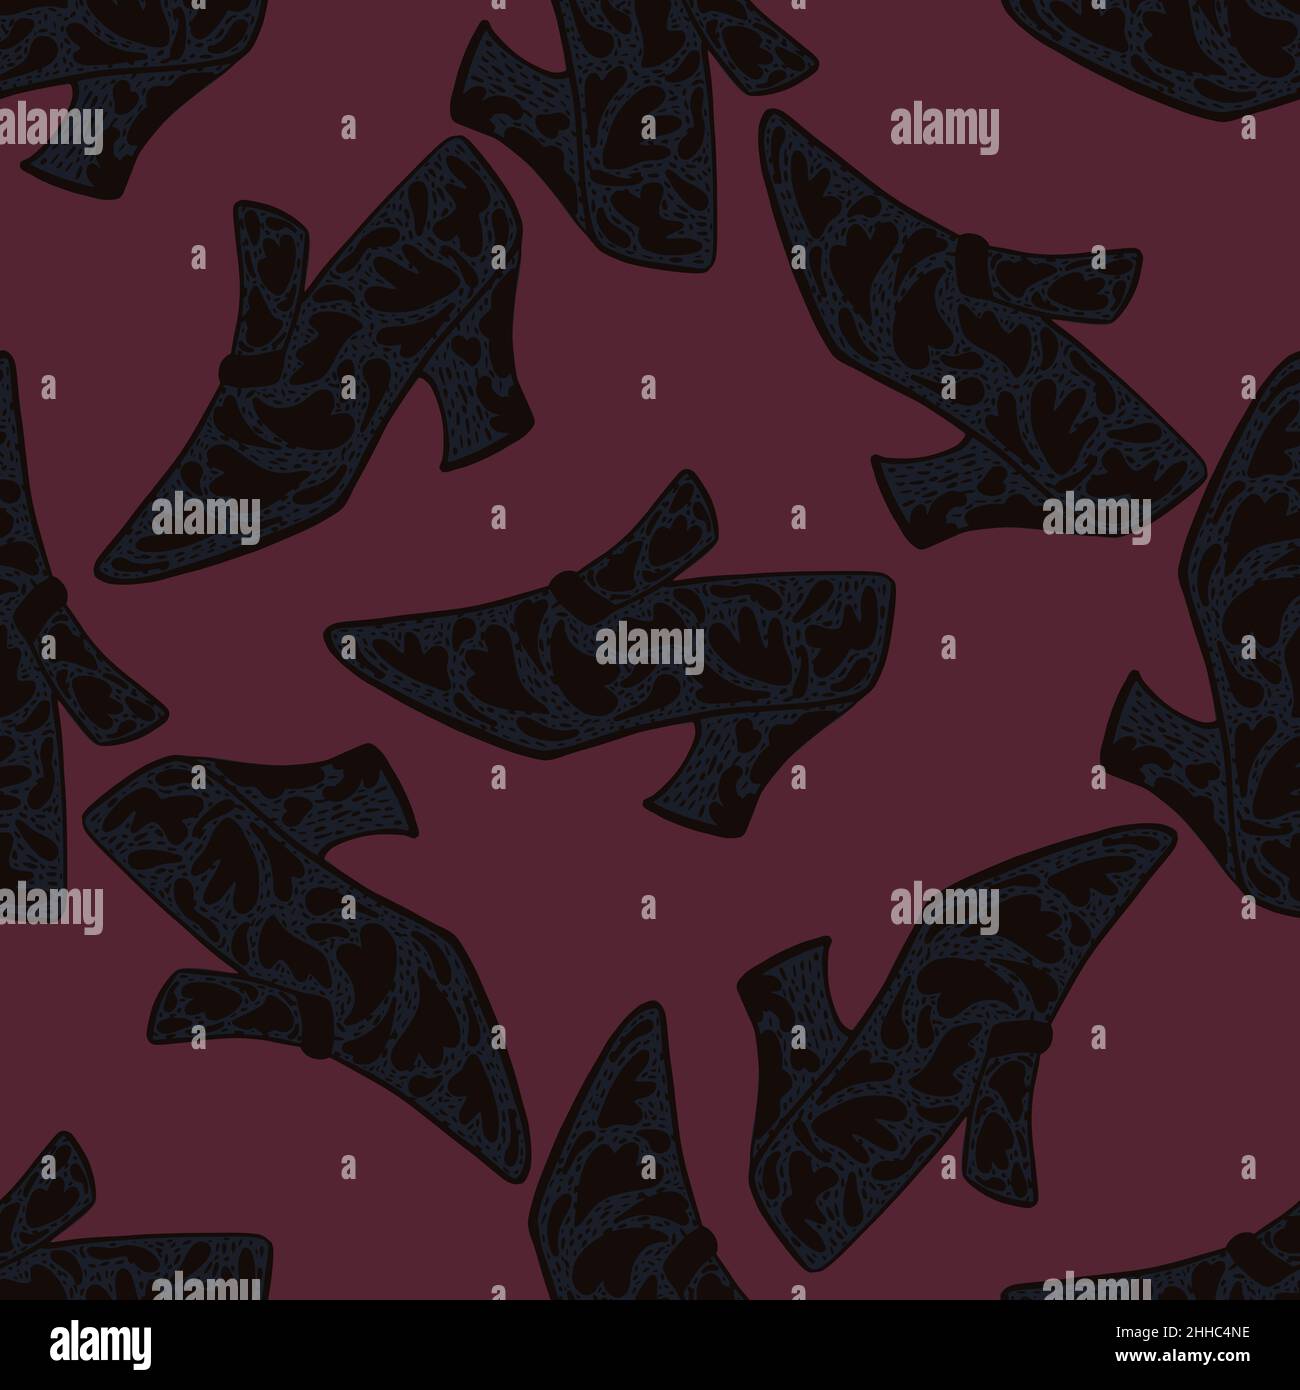 Dark abstract seamless style pattern with fashionable boots ornament. Dark pink background. Vector illustration for seasonal textile prints, fabric, b Stock Vector